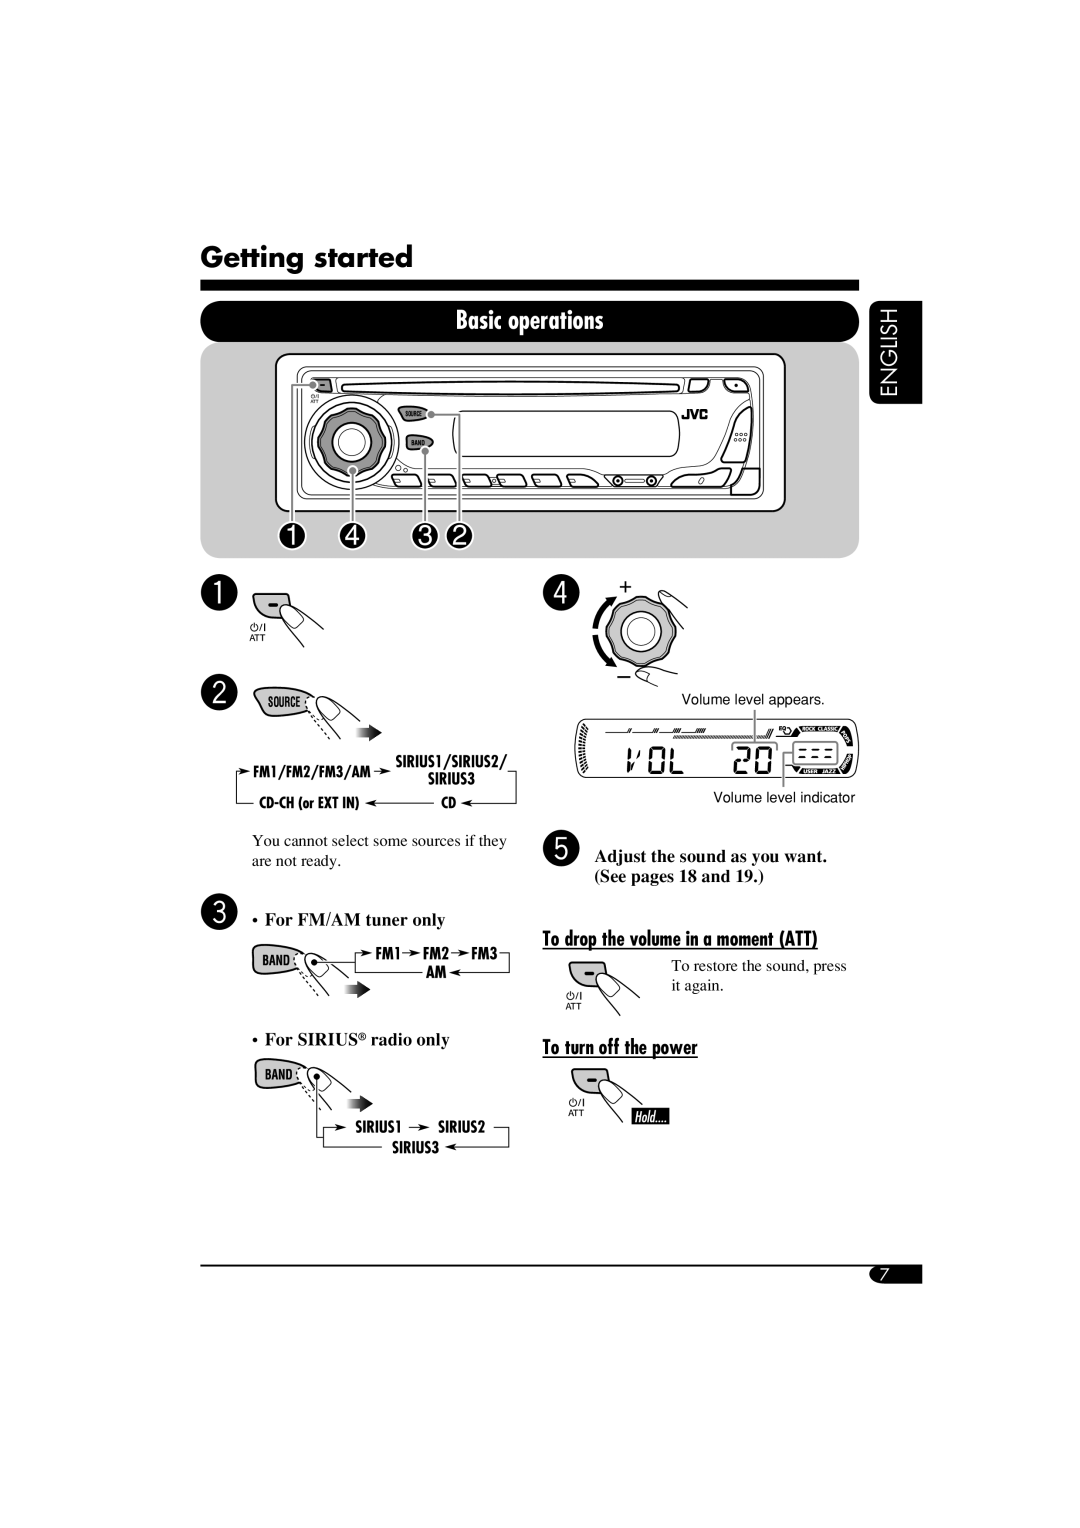 JVC KD-G310 manual Getting started, Basic operations, English, @ Adjust the sound as you want, See pages 18 and, it again 